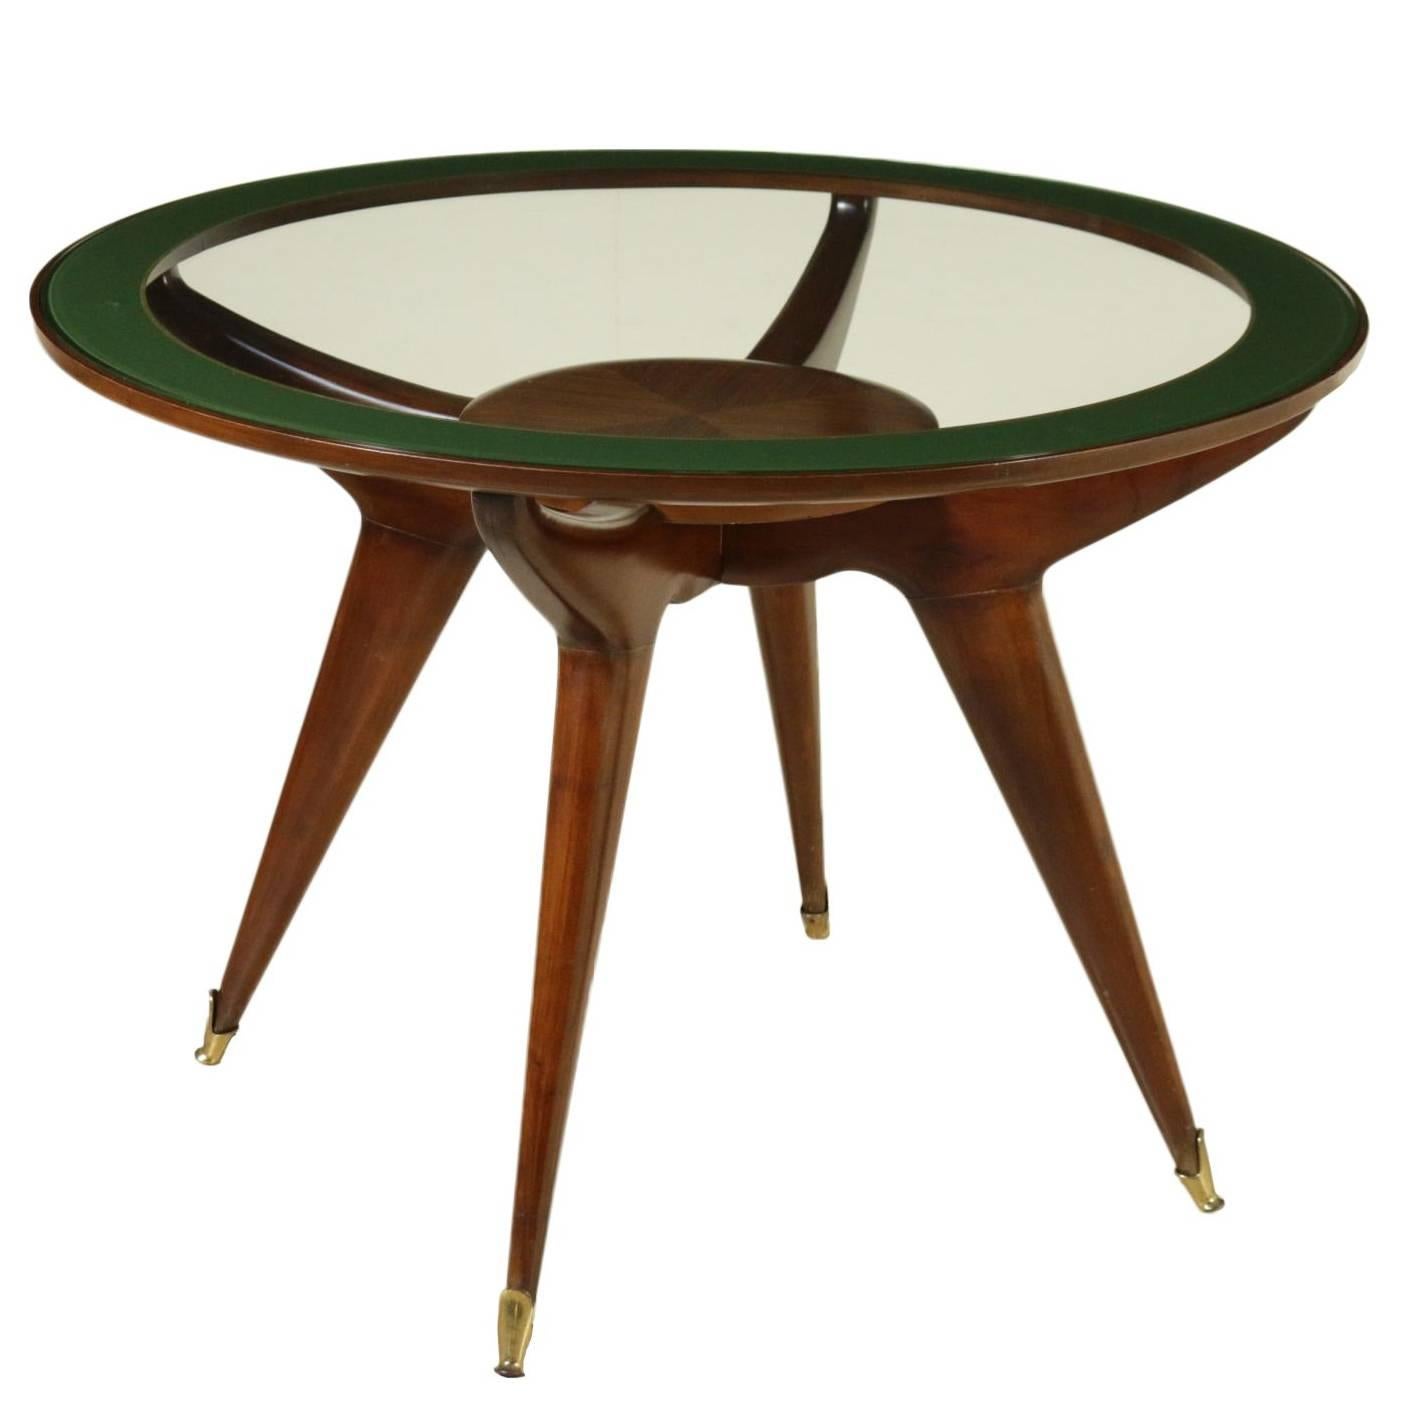 Table designed by Gambarelli Beech Rosewood Glass Vintage, Italy, 1958